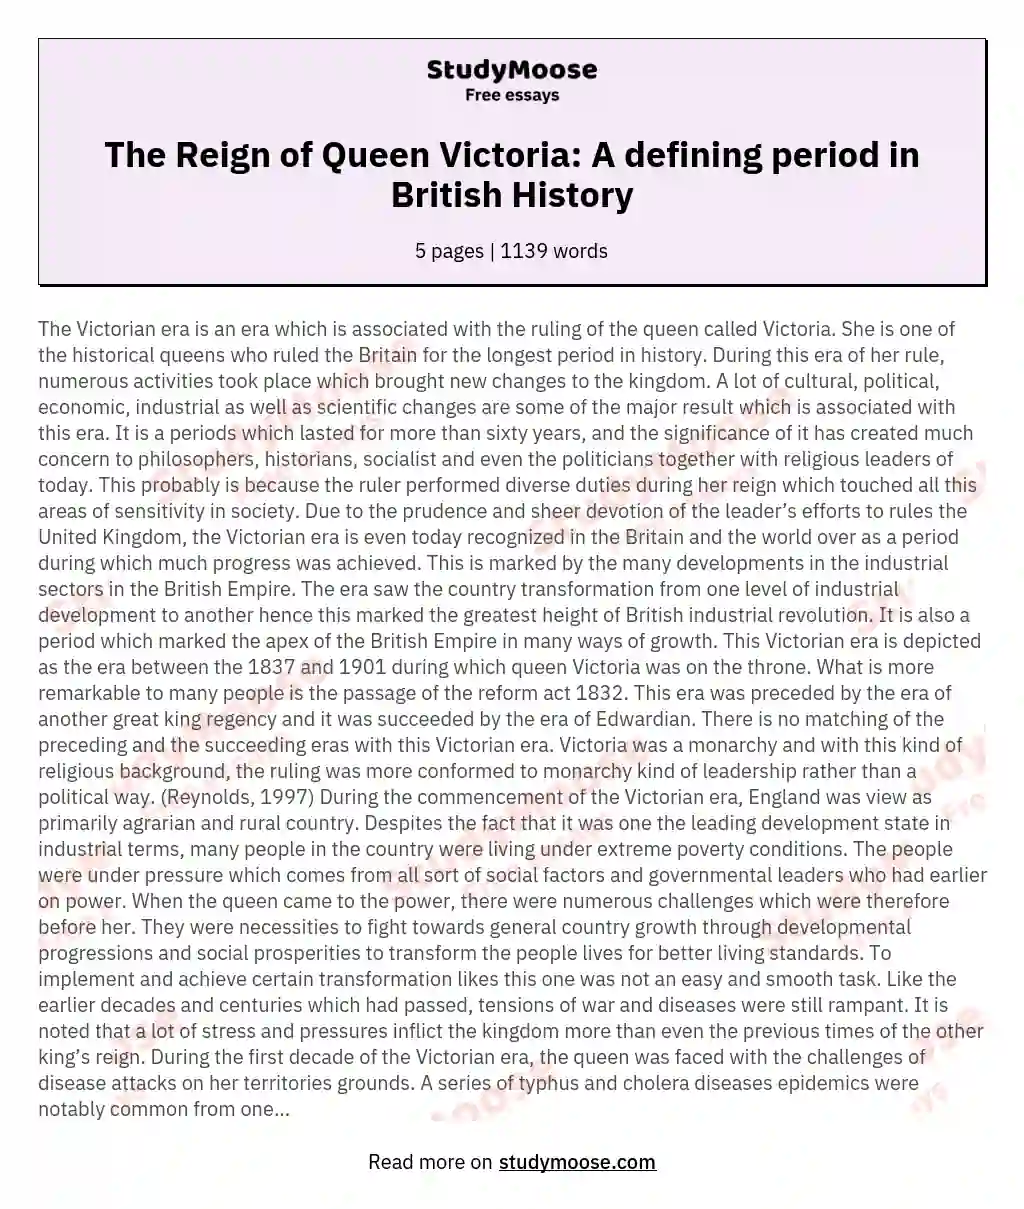 The Reign of Queen Victoria: A defining period in British History essay